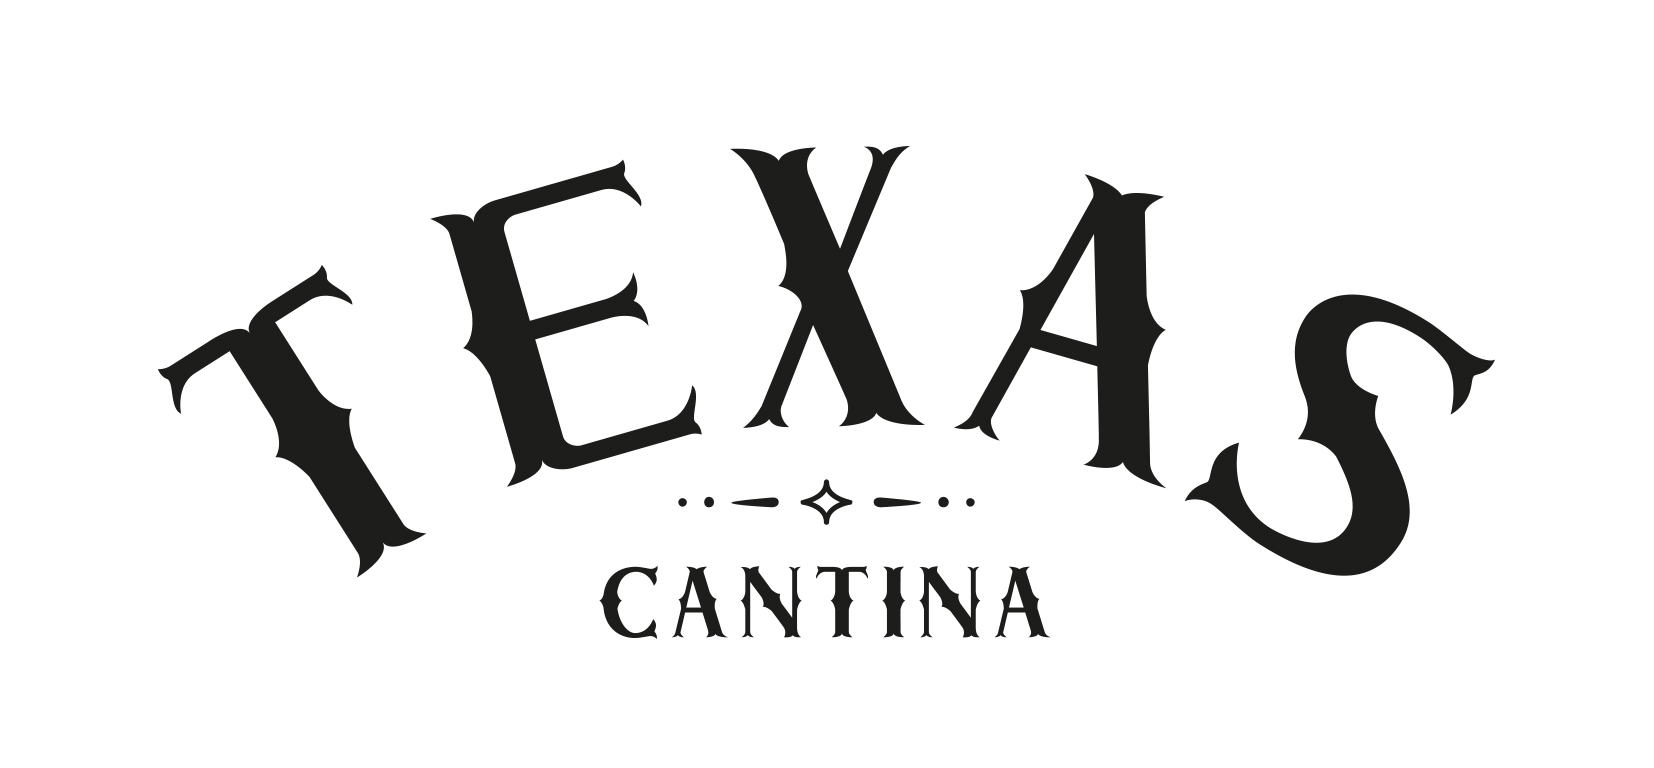 TEXAS Cantina – American Chamber of Commerce in Estonia